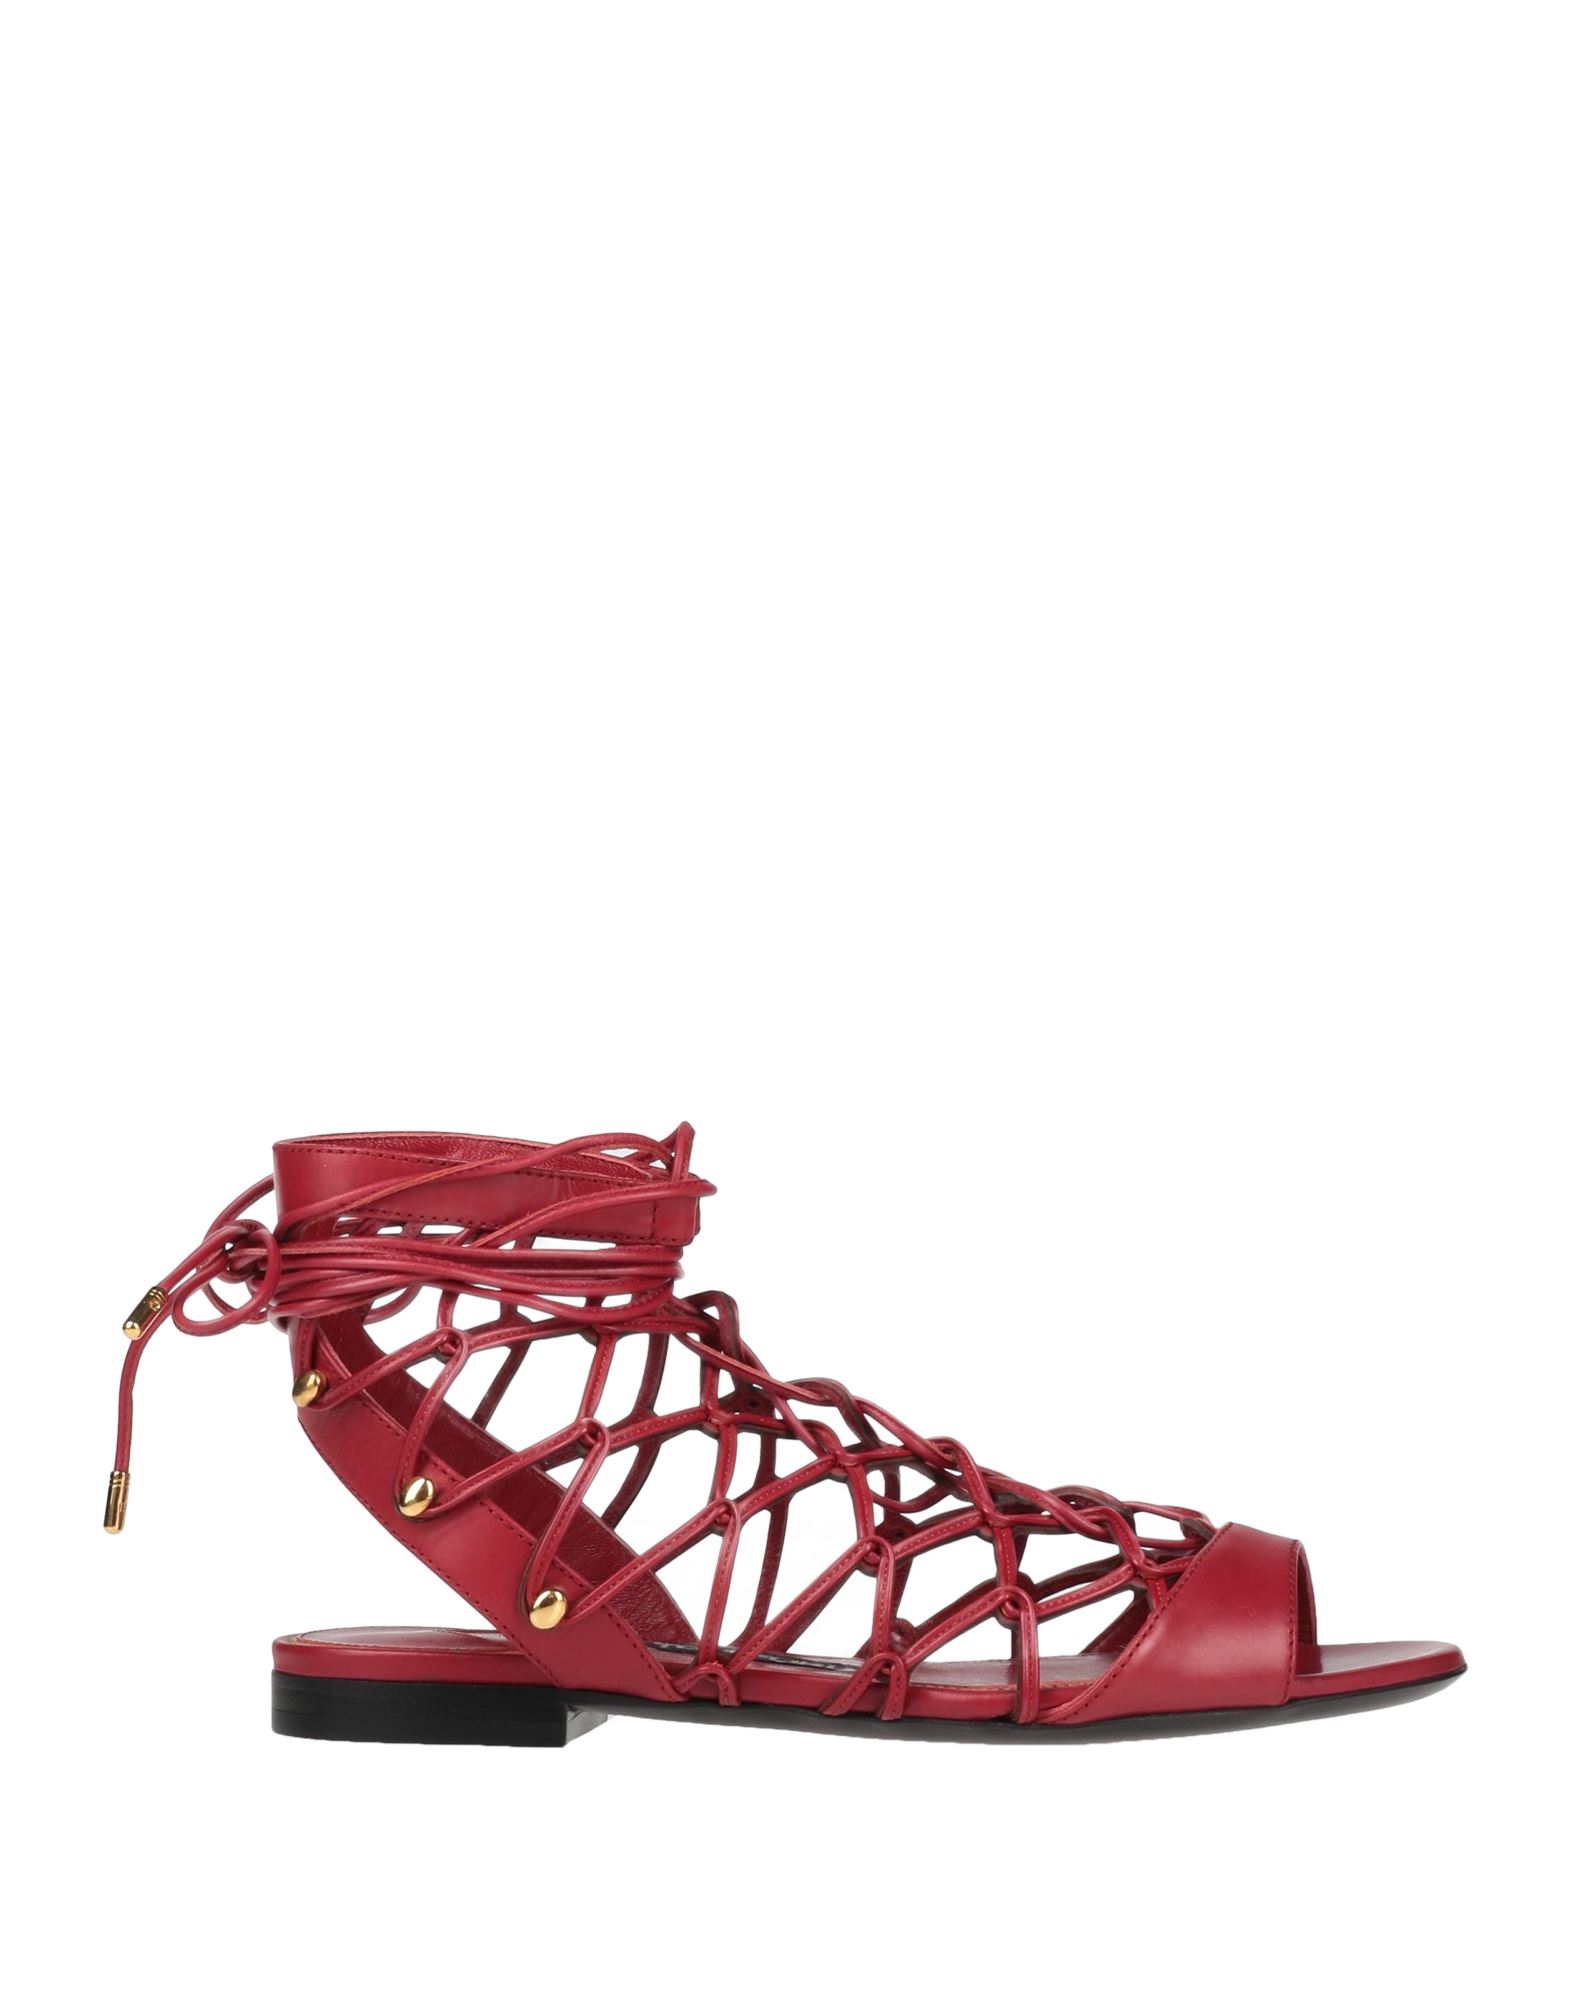 Tom Ford Sandals In Red | ModeSens